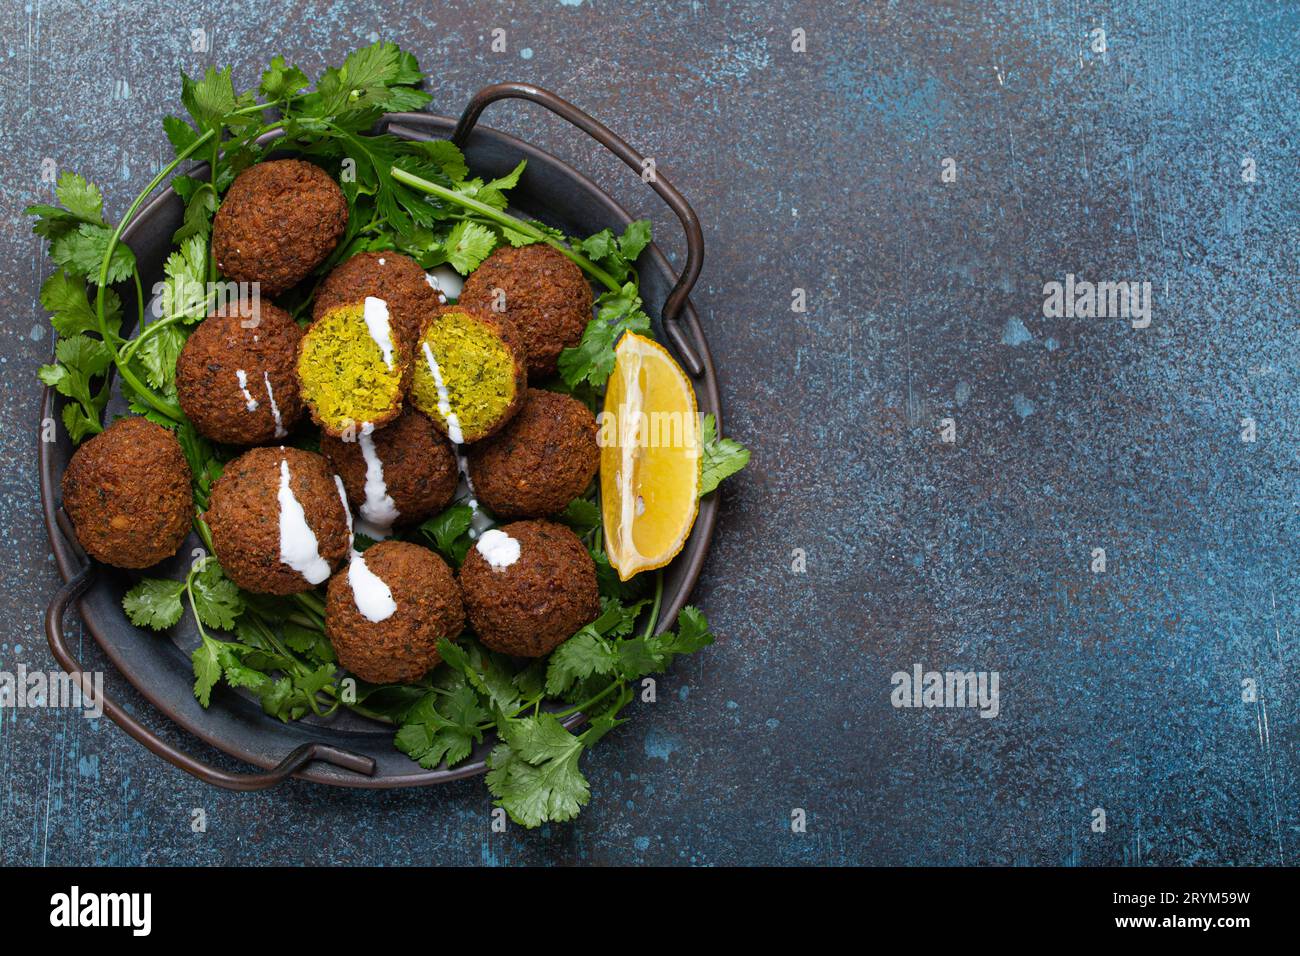 Plate of fried falafel balls served with fresh green cilantro and lemon top view on rustic concrete background. Traditional vega Stock Photo